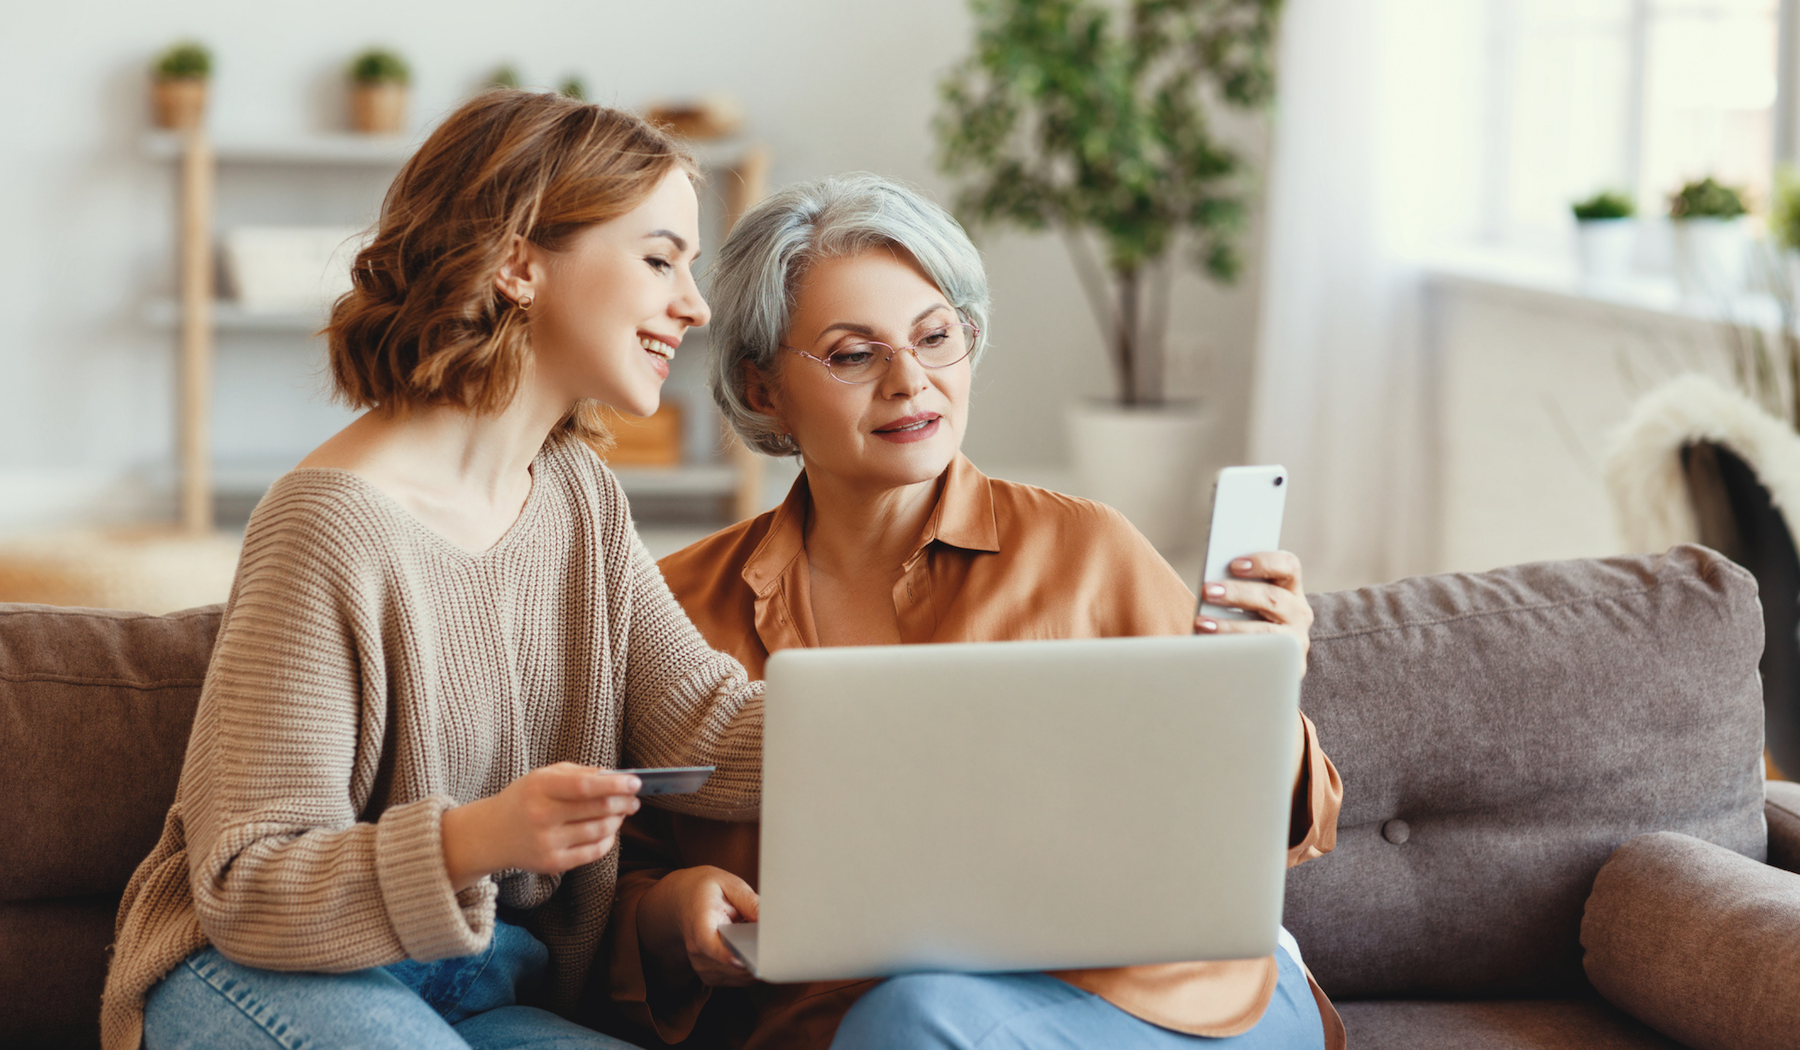 A mother and daughter sit on a couch together looking at a laptop screen. The mother is holding a cellphone while the daughter holds a credit card.